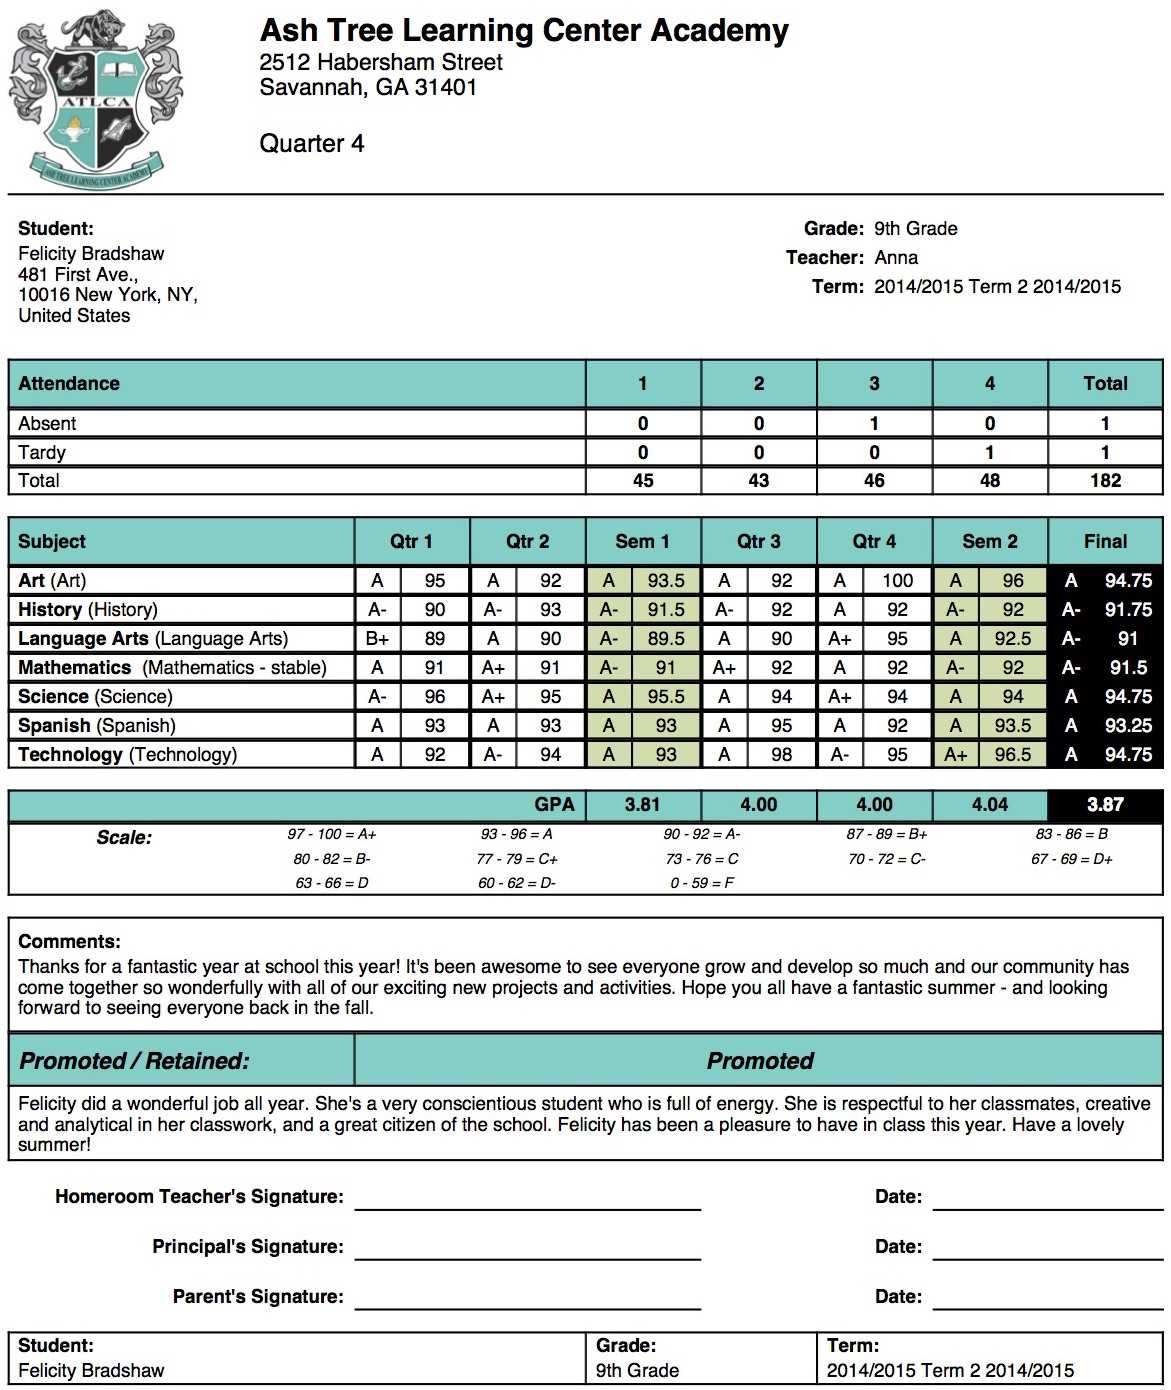 Ash Tree Learning Center Academy Report Card Template In High School Student Report Card Template